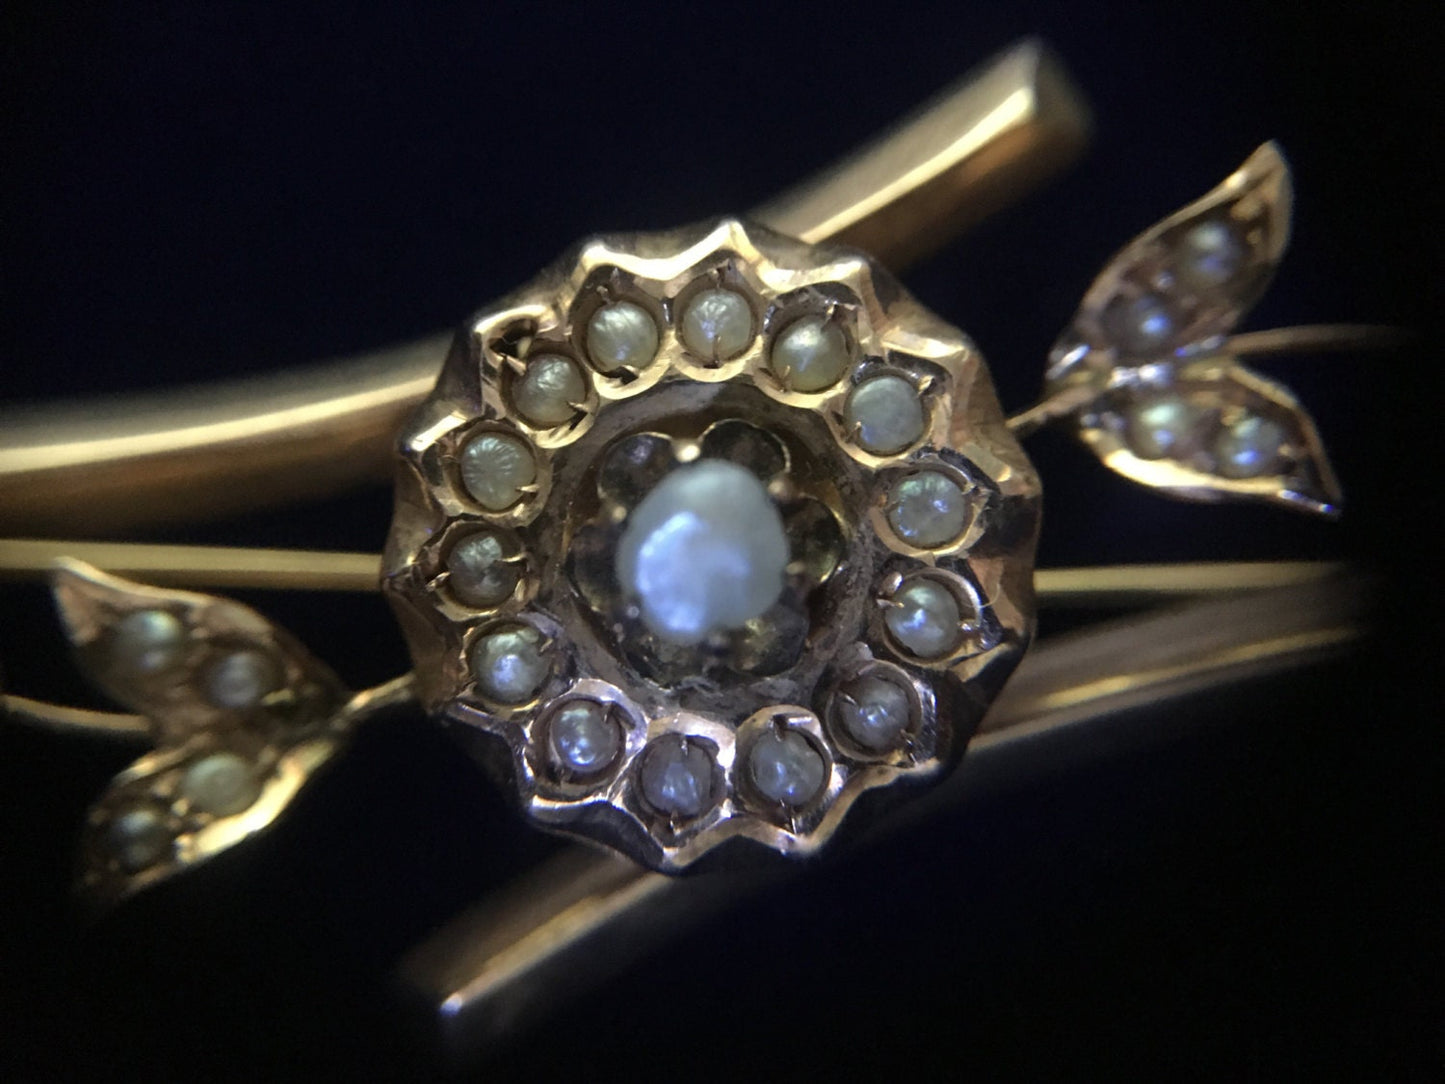 Antique, Victorian 18K Seed Pearl Flower/Leaf Design Brooch Pin - In-store pickup Only